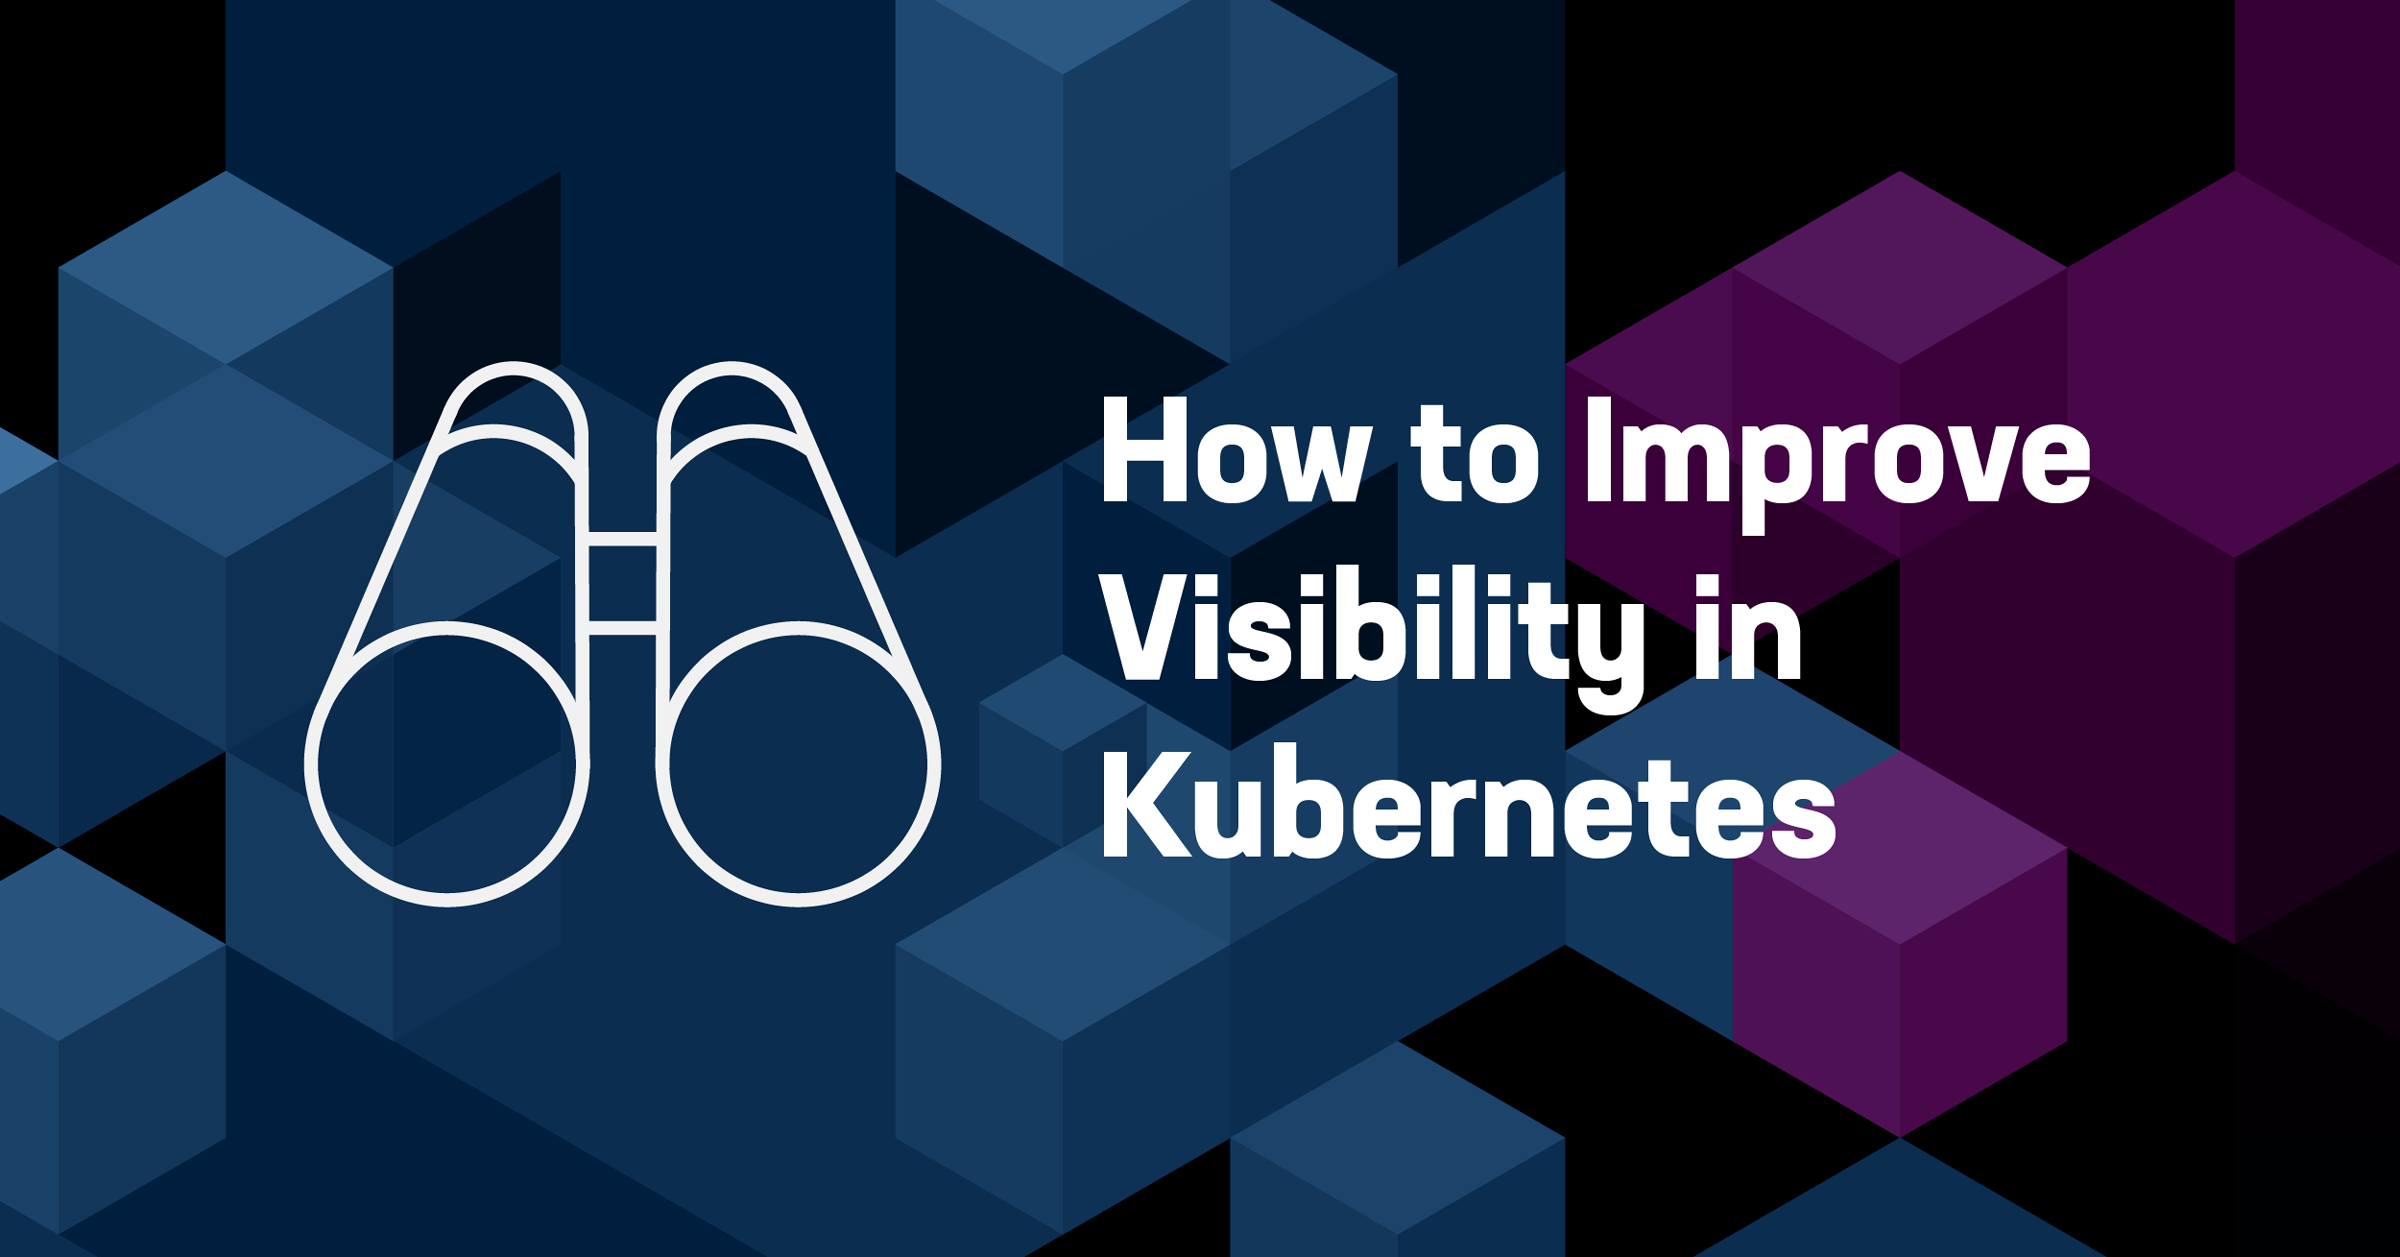 How to Improve Visibility in Kubernetes